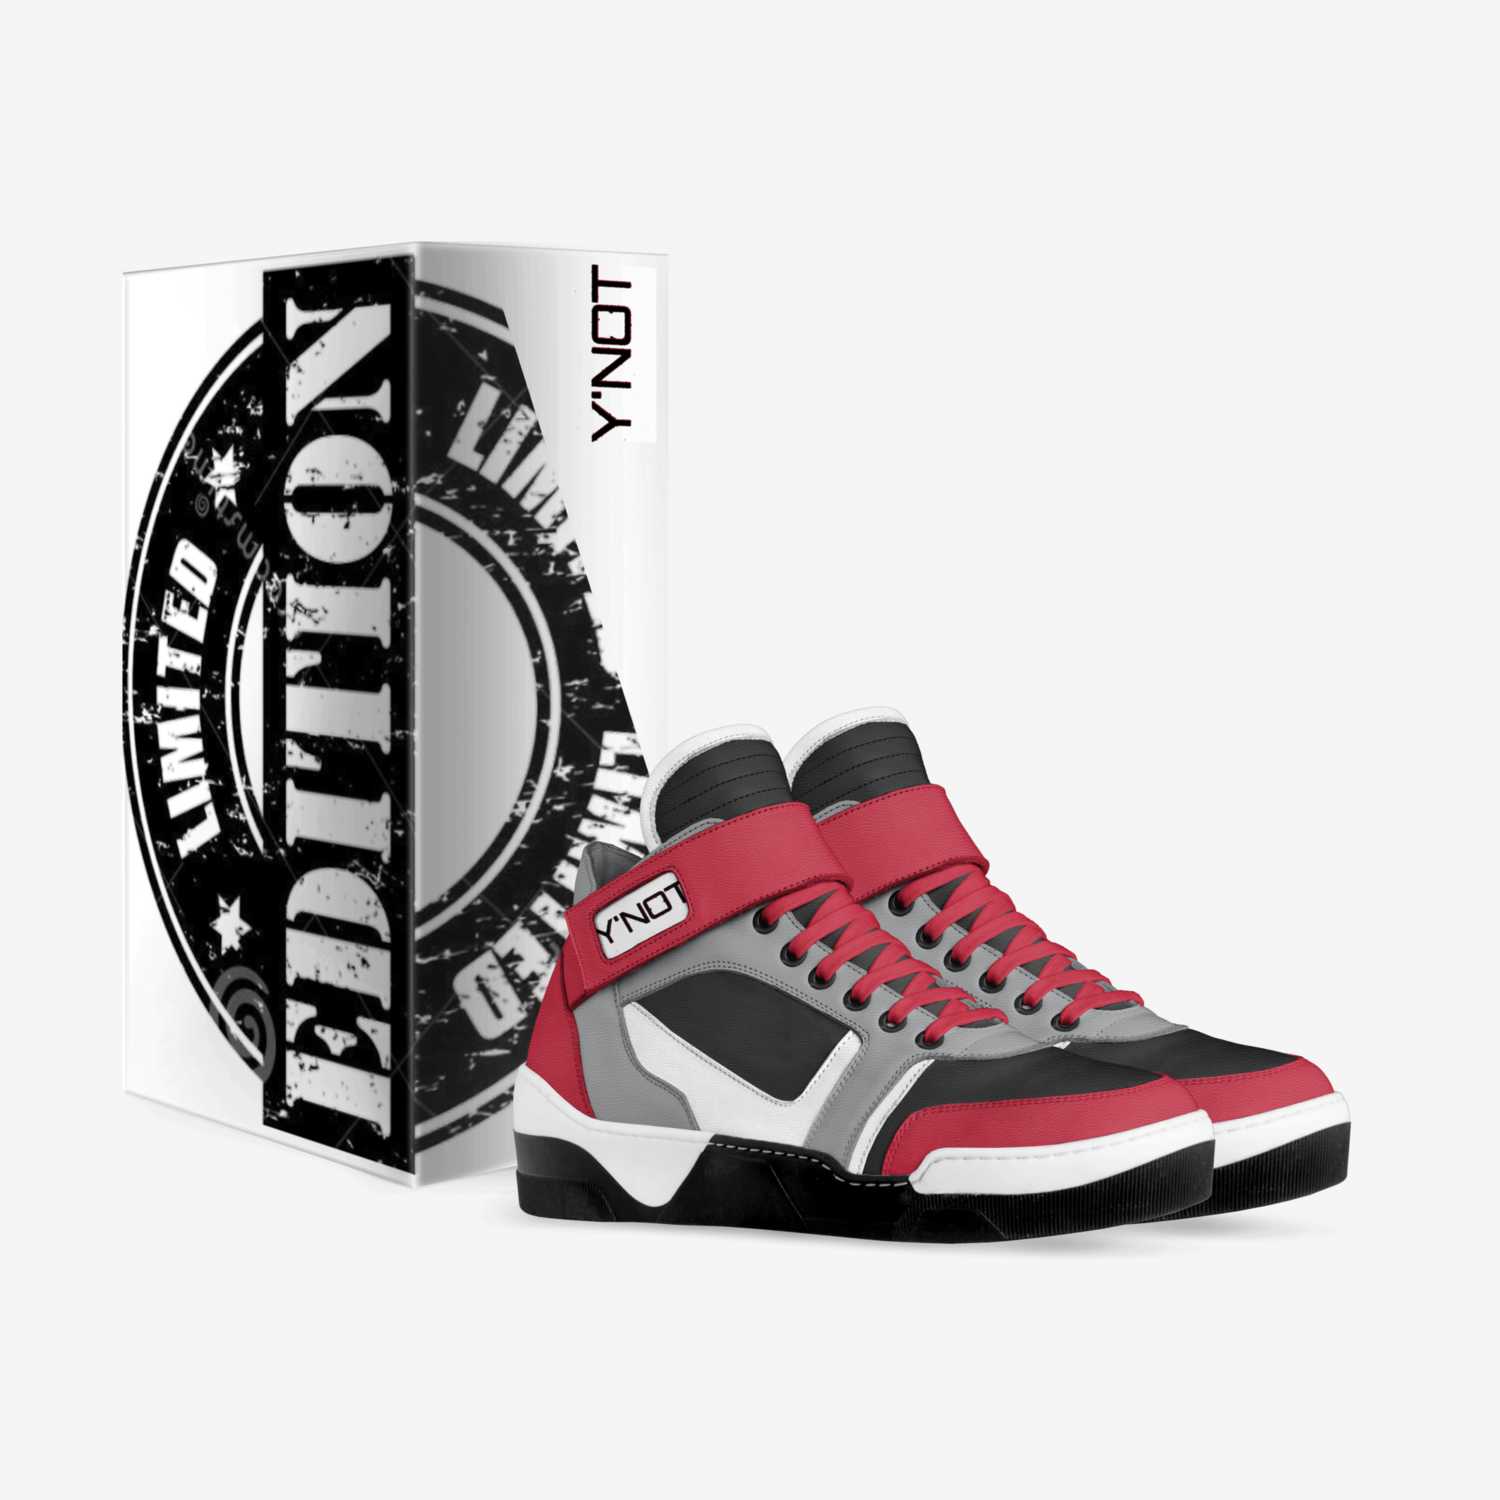 Y'NOT custom made in Italy shoes by Tony Johnson | Box view